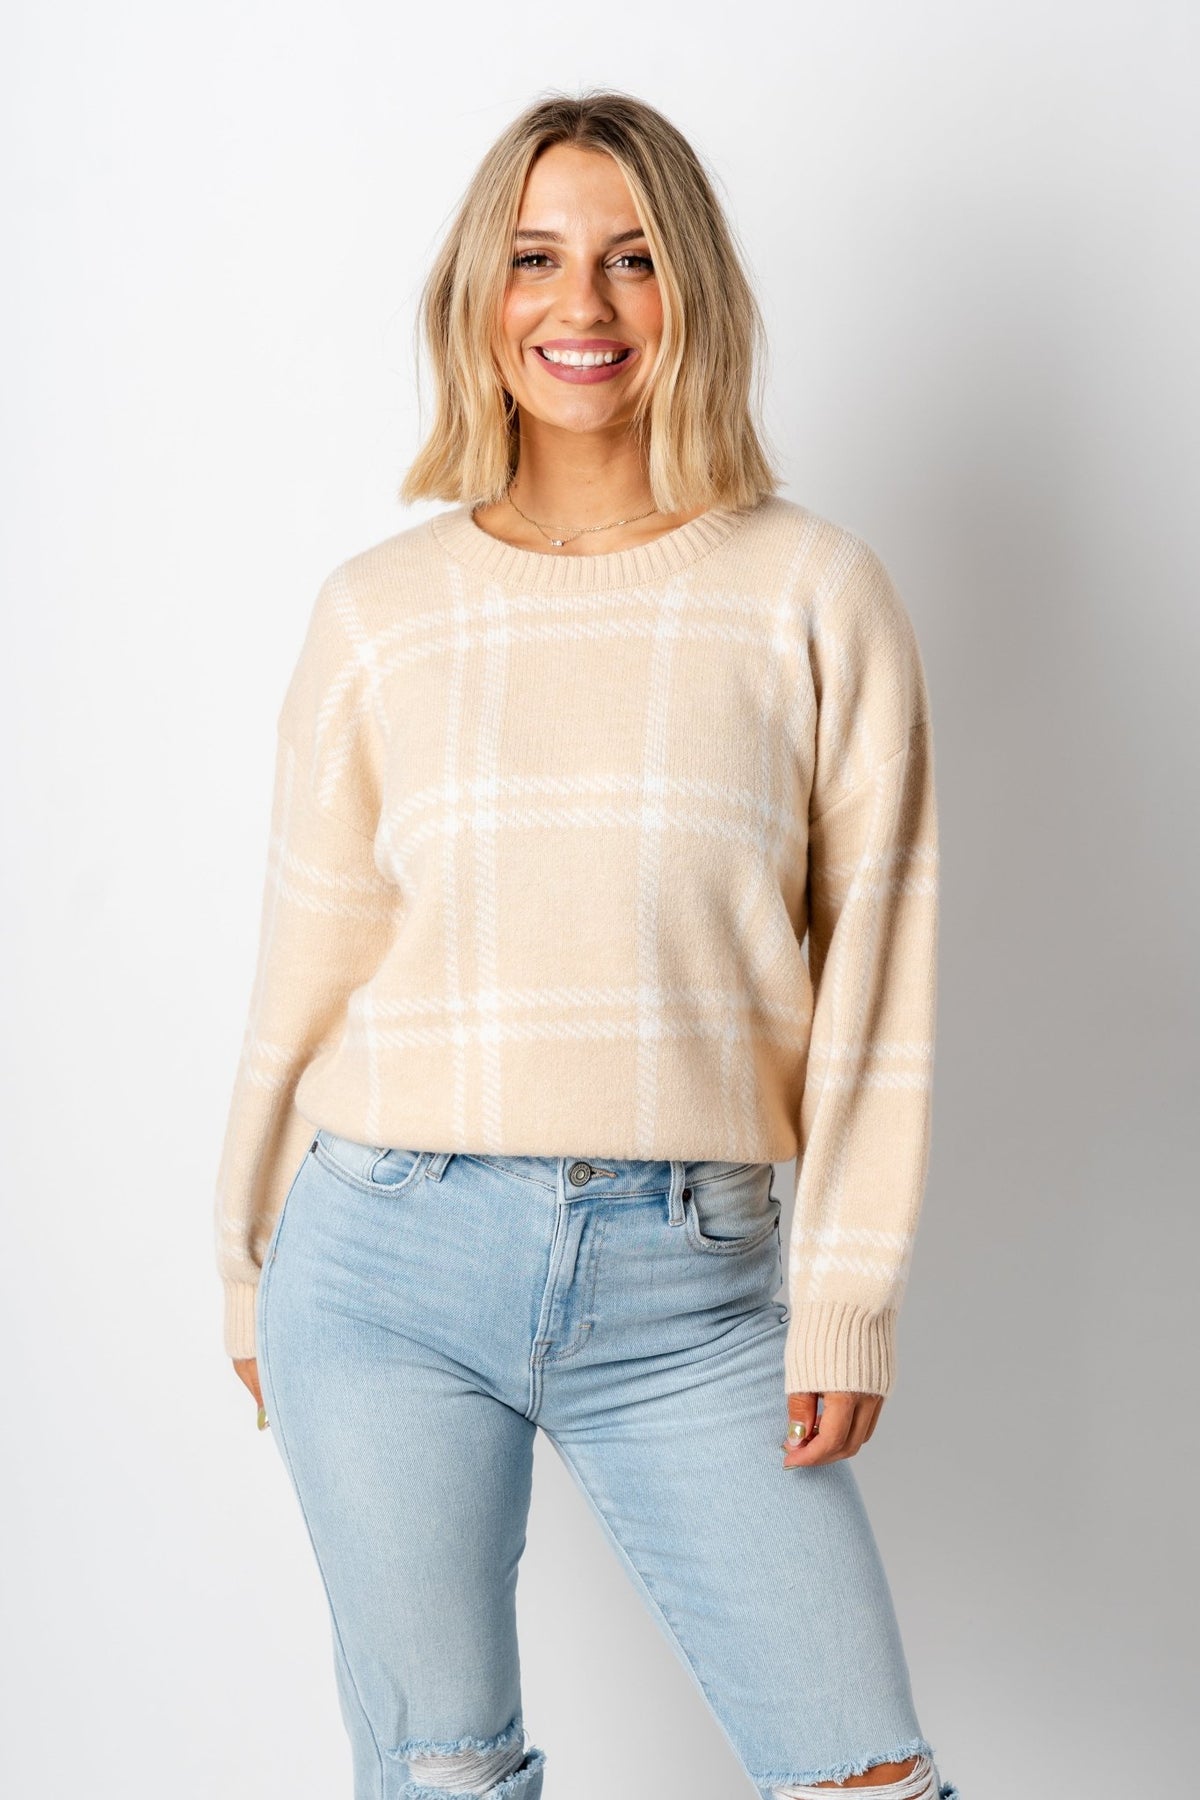 Z Supply Jolene plaid sweater almond - Z Supply Sweaters - Z Supply Tops, Dresses, Tanks, Tees, Cardigans, Joggers and Loungewear at Lush Fashion Lounge